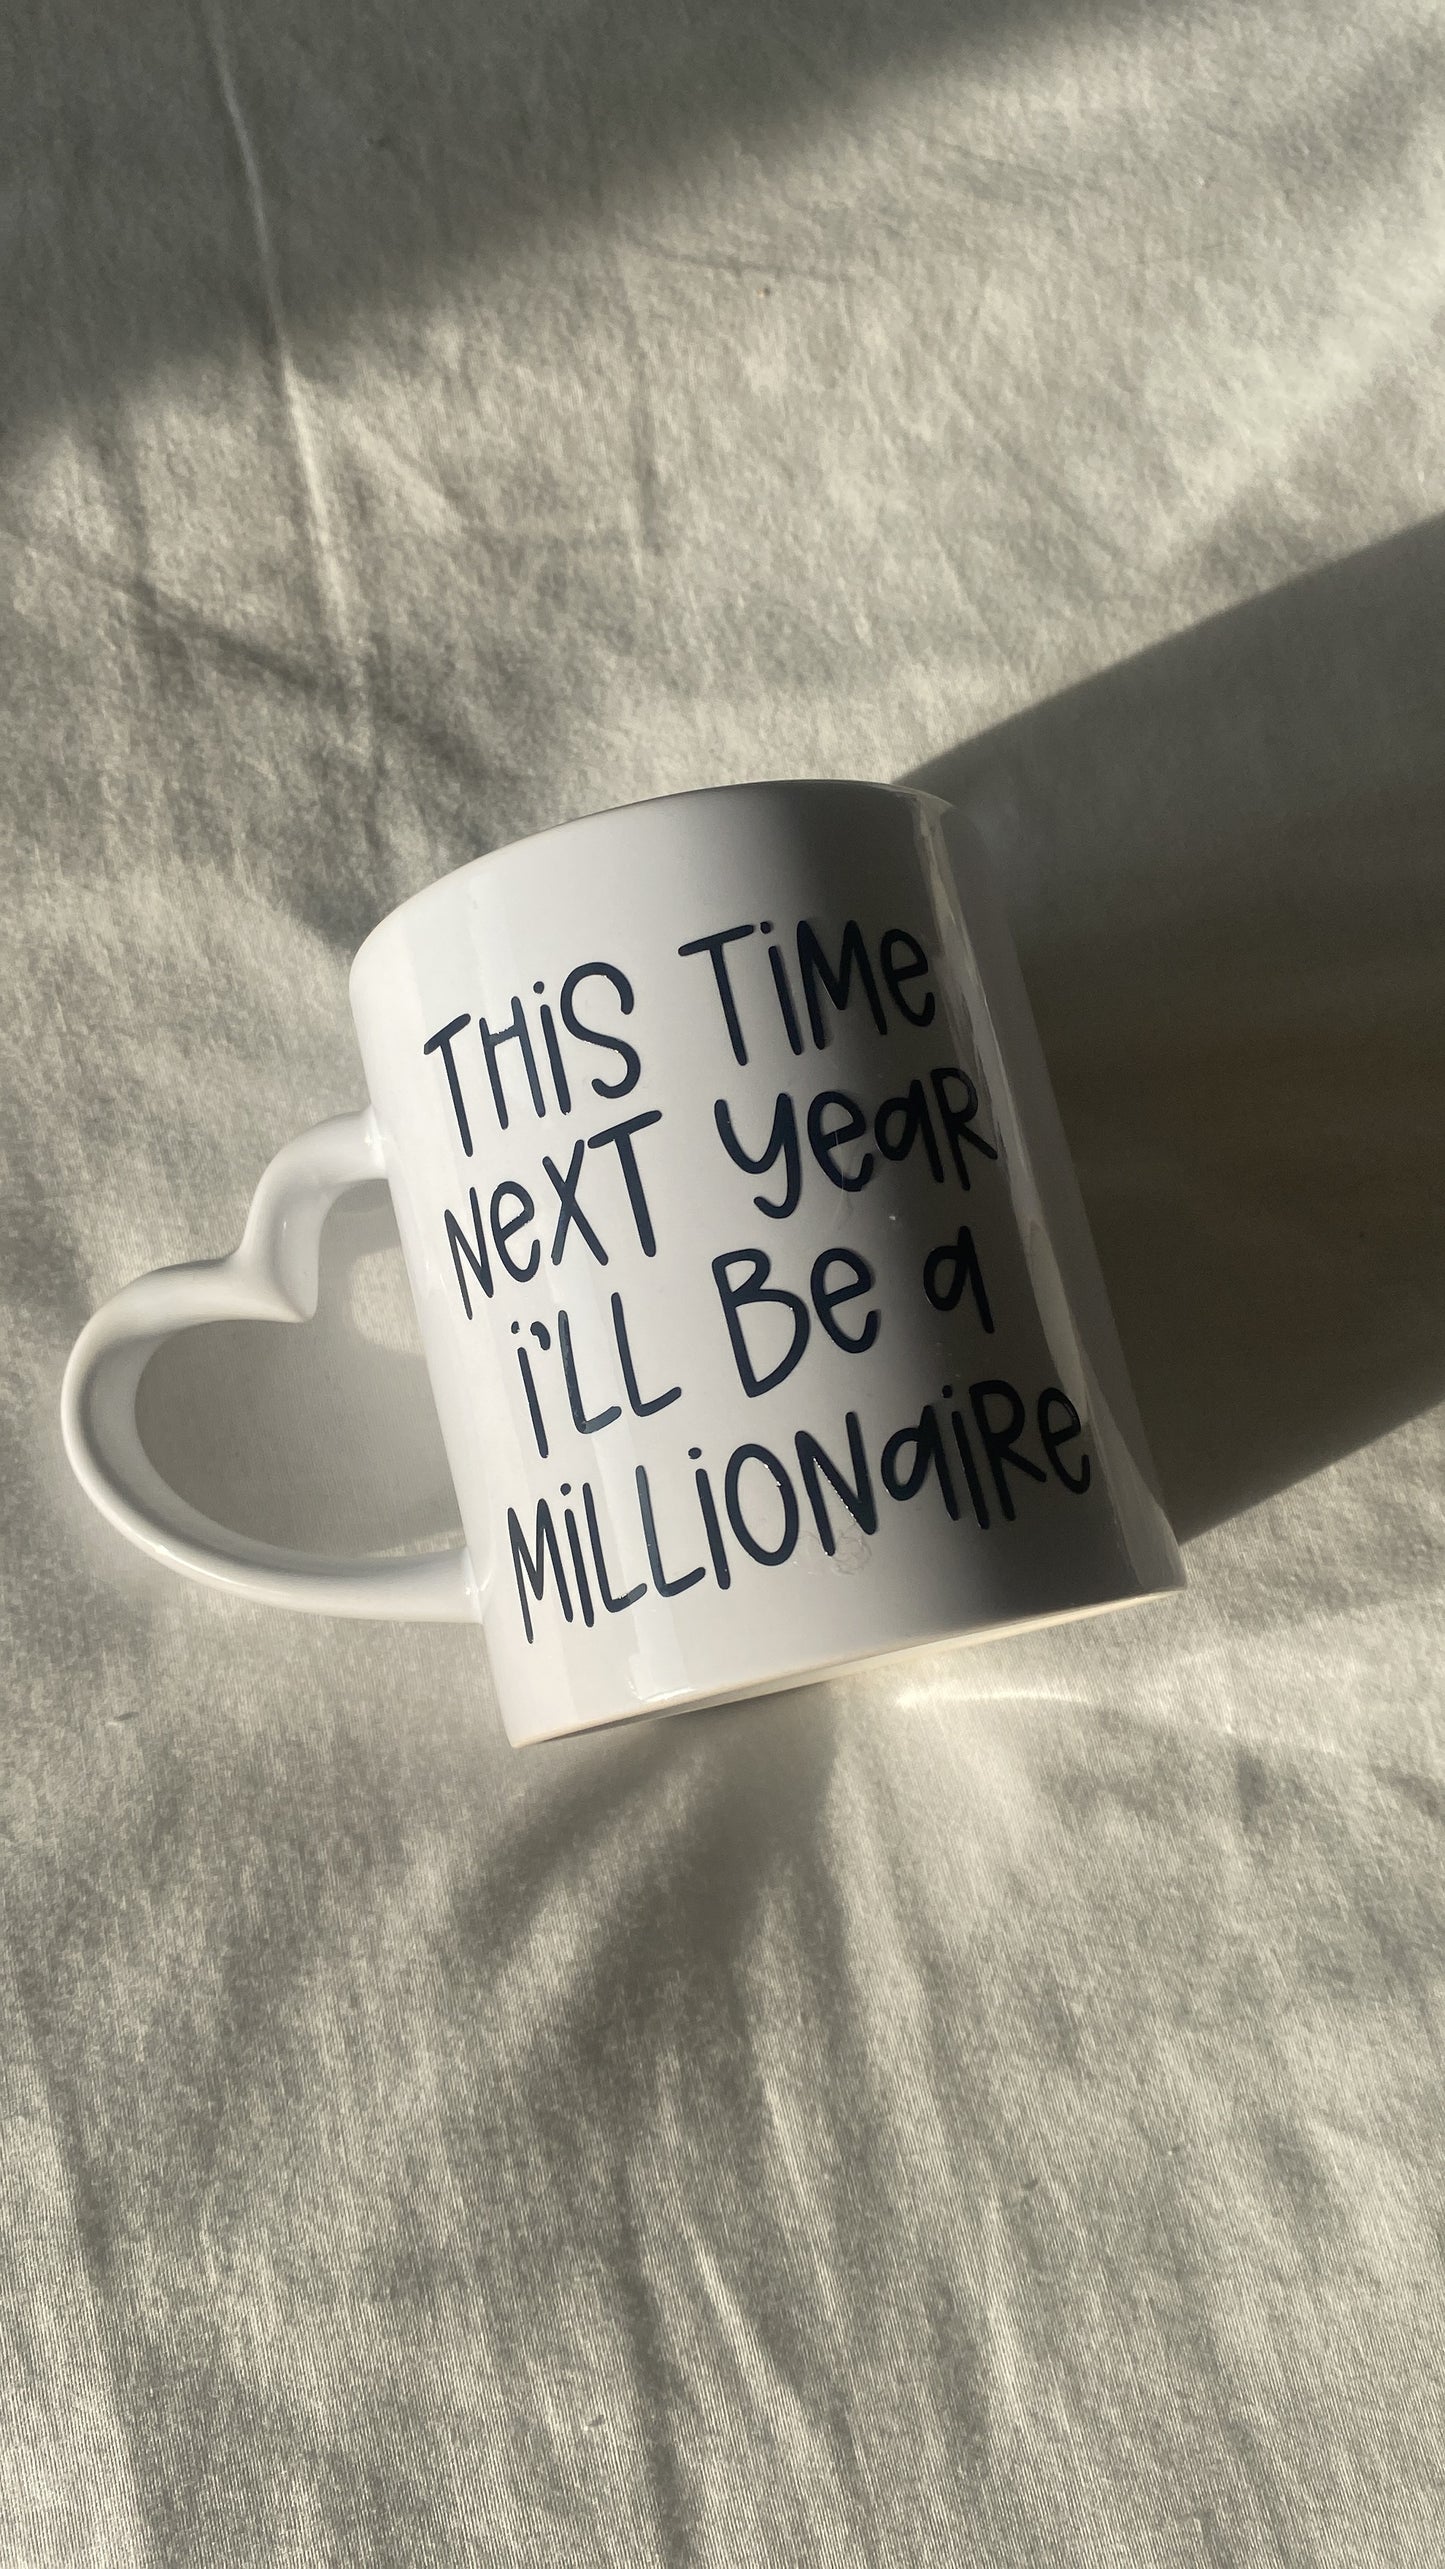 This time next year I’ll be a millionaire mug